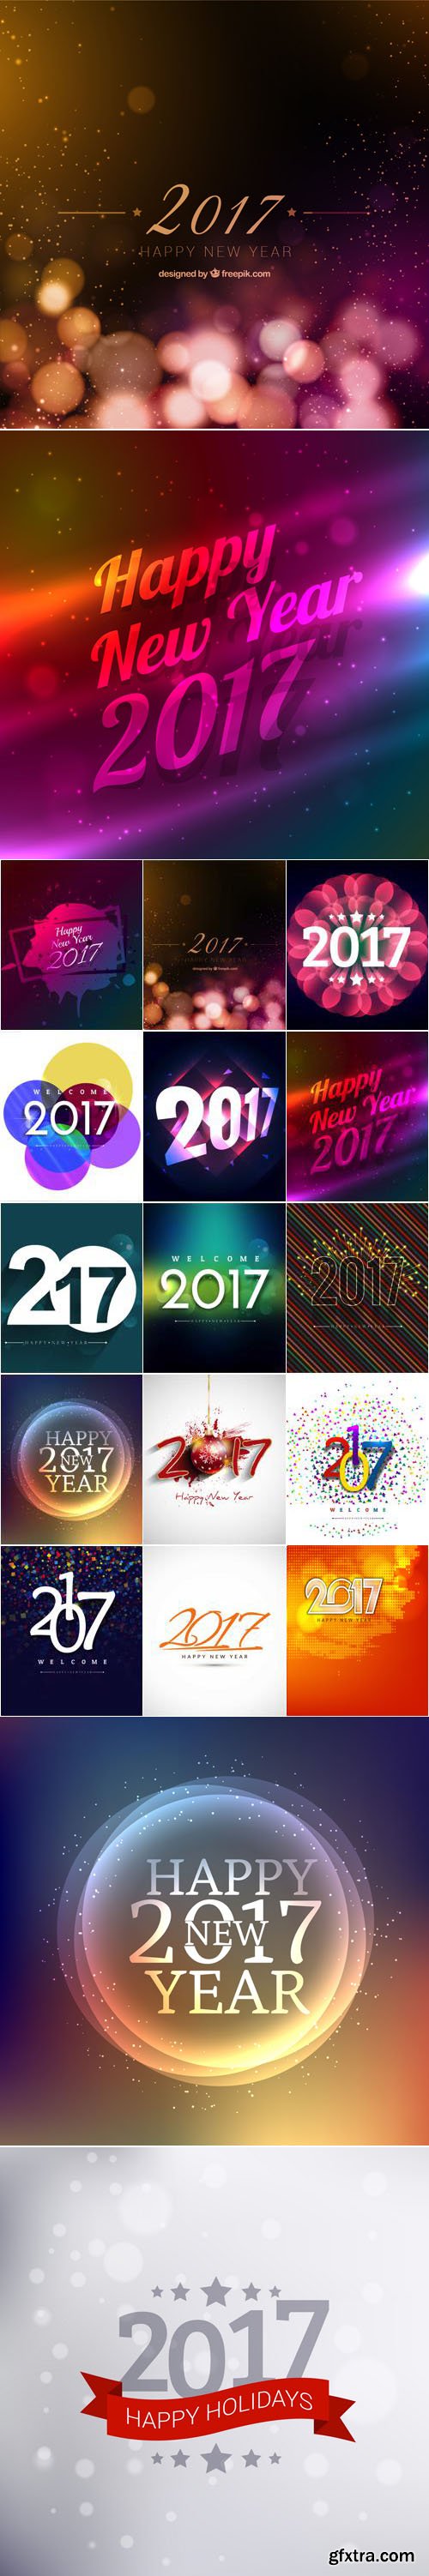 2017 New Year Backgrounds Vol.3 [EPS]